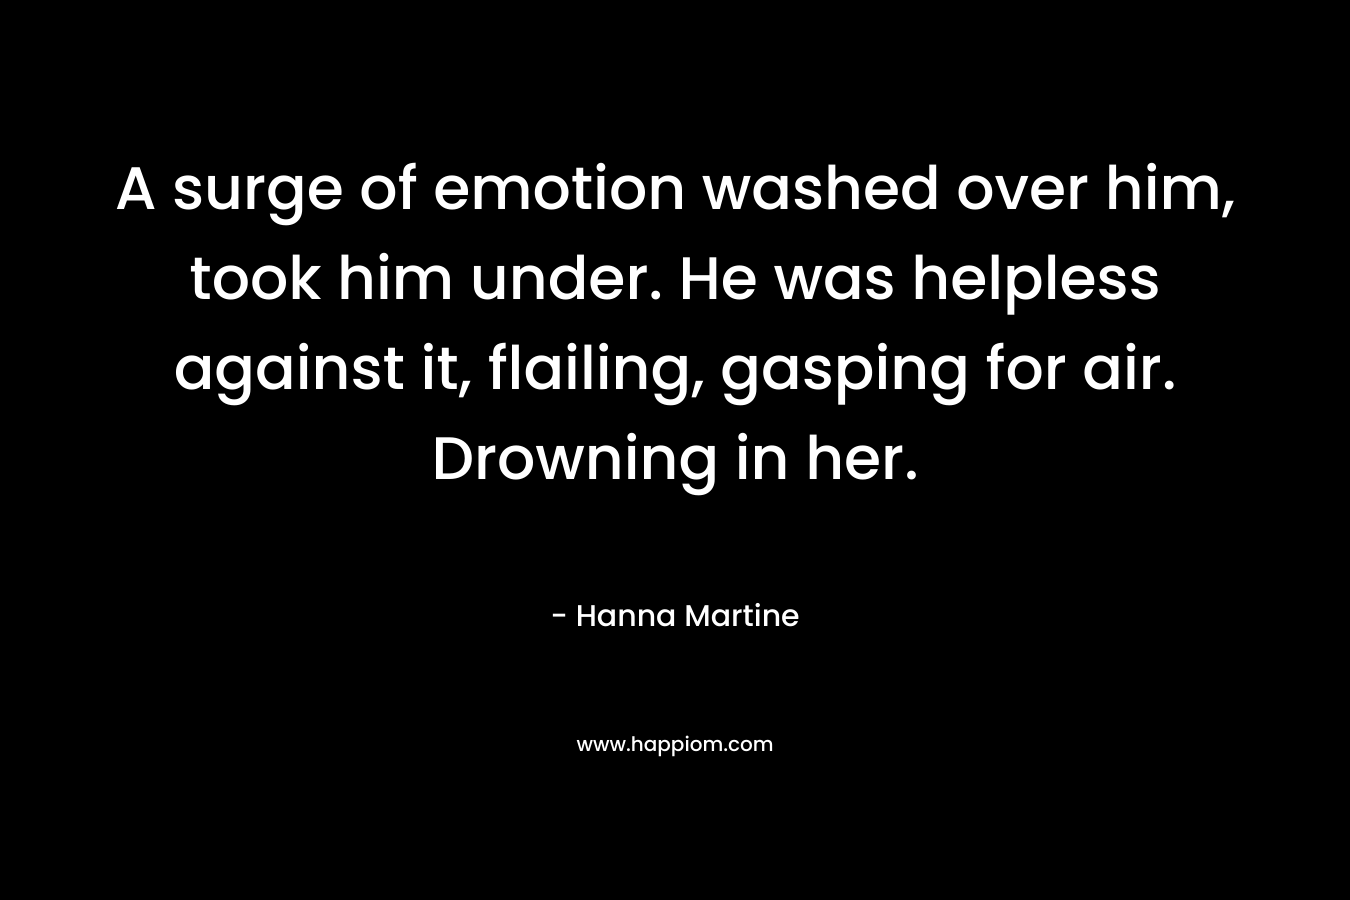 A surge of emotion washed over him, took him under. He was helpless against it, flailing, gasping for air. Drowning in her.